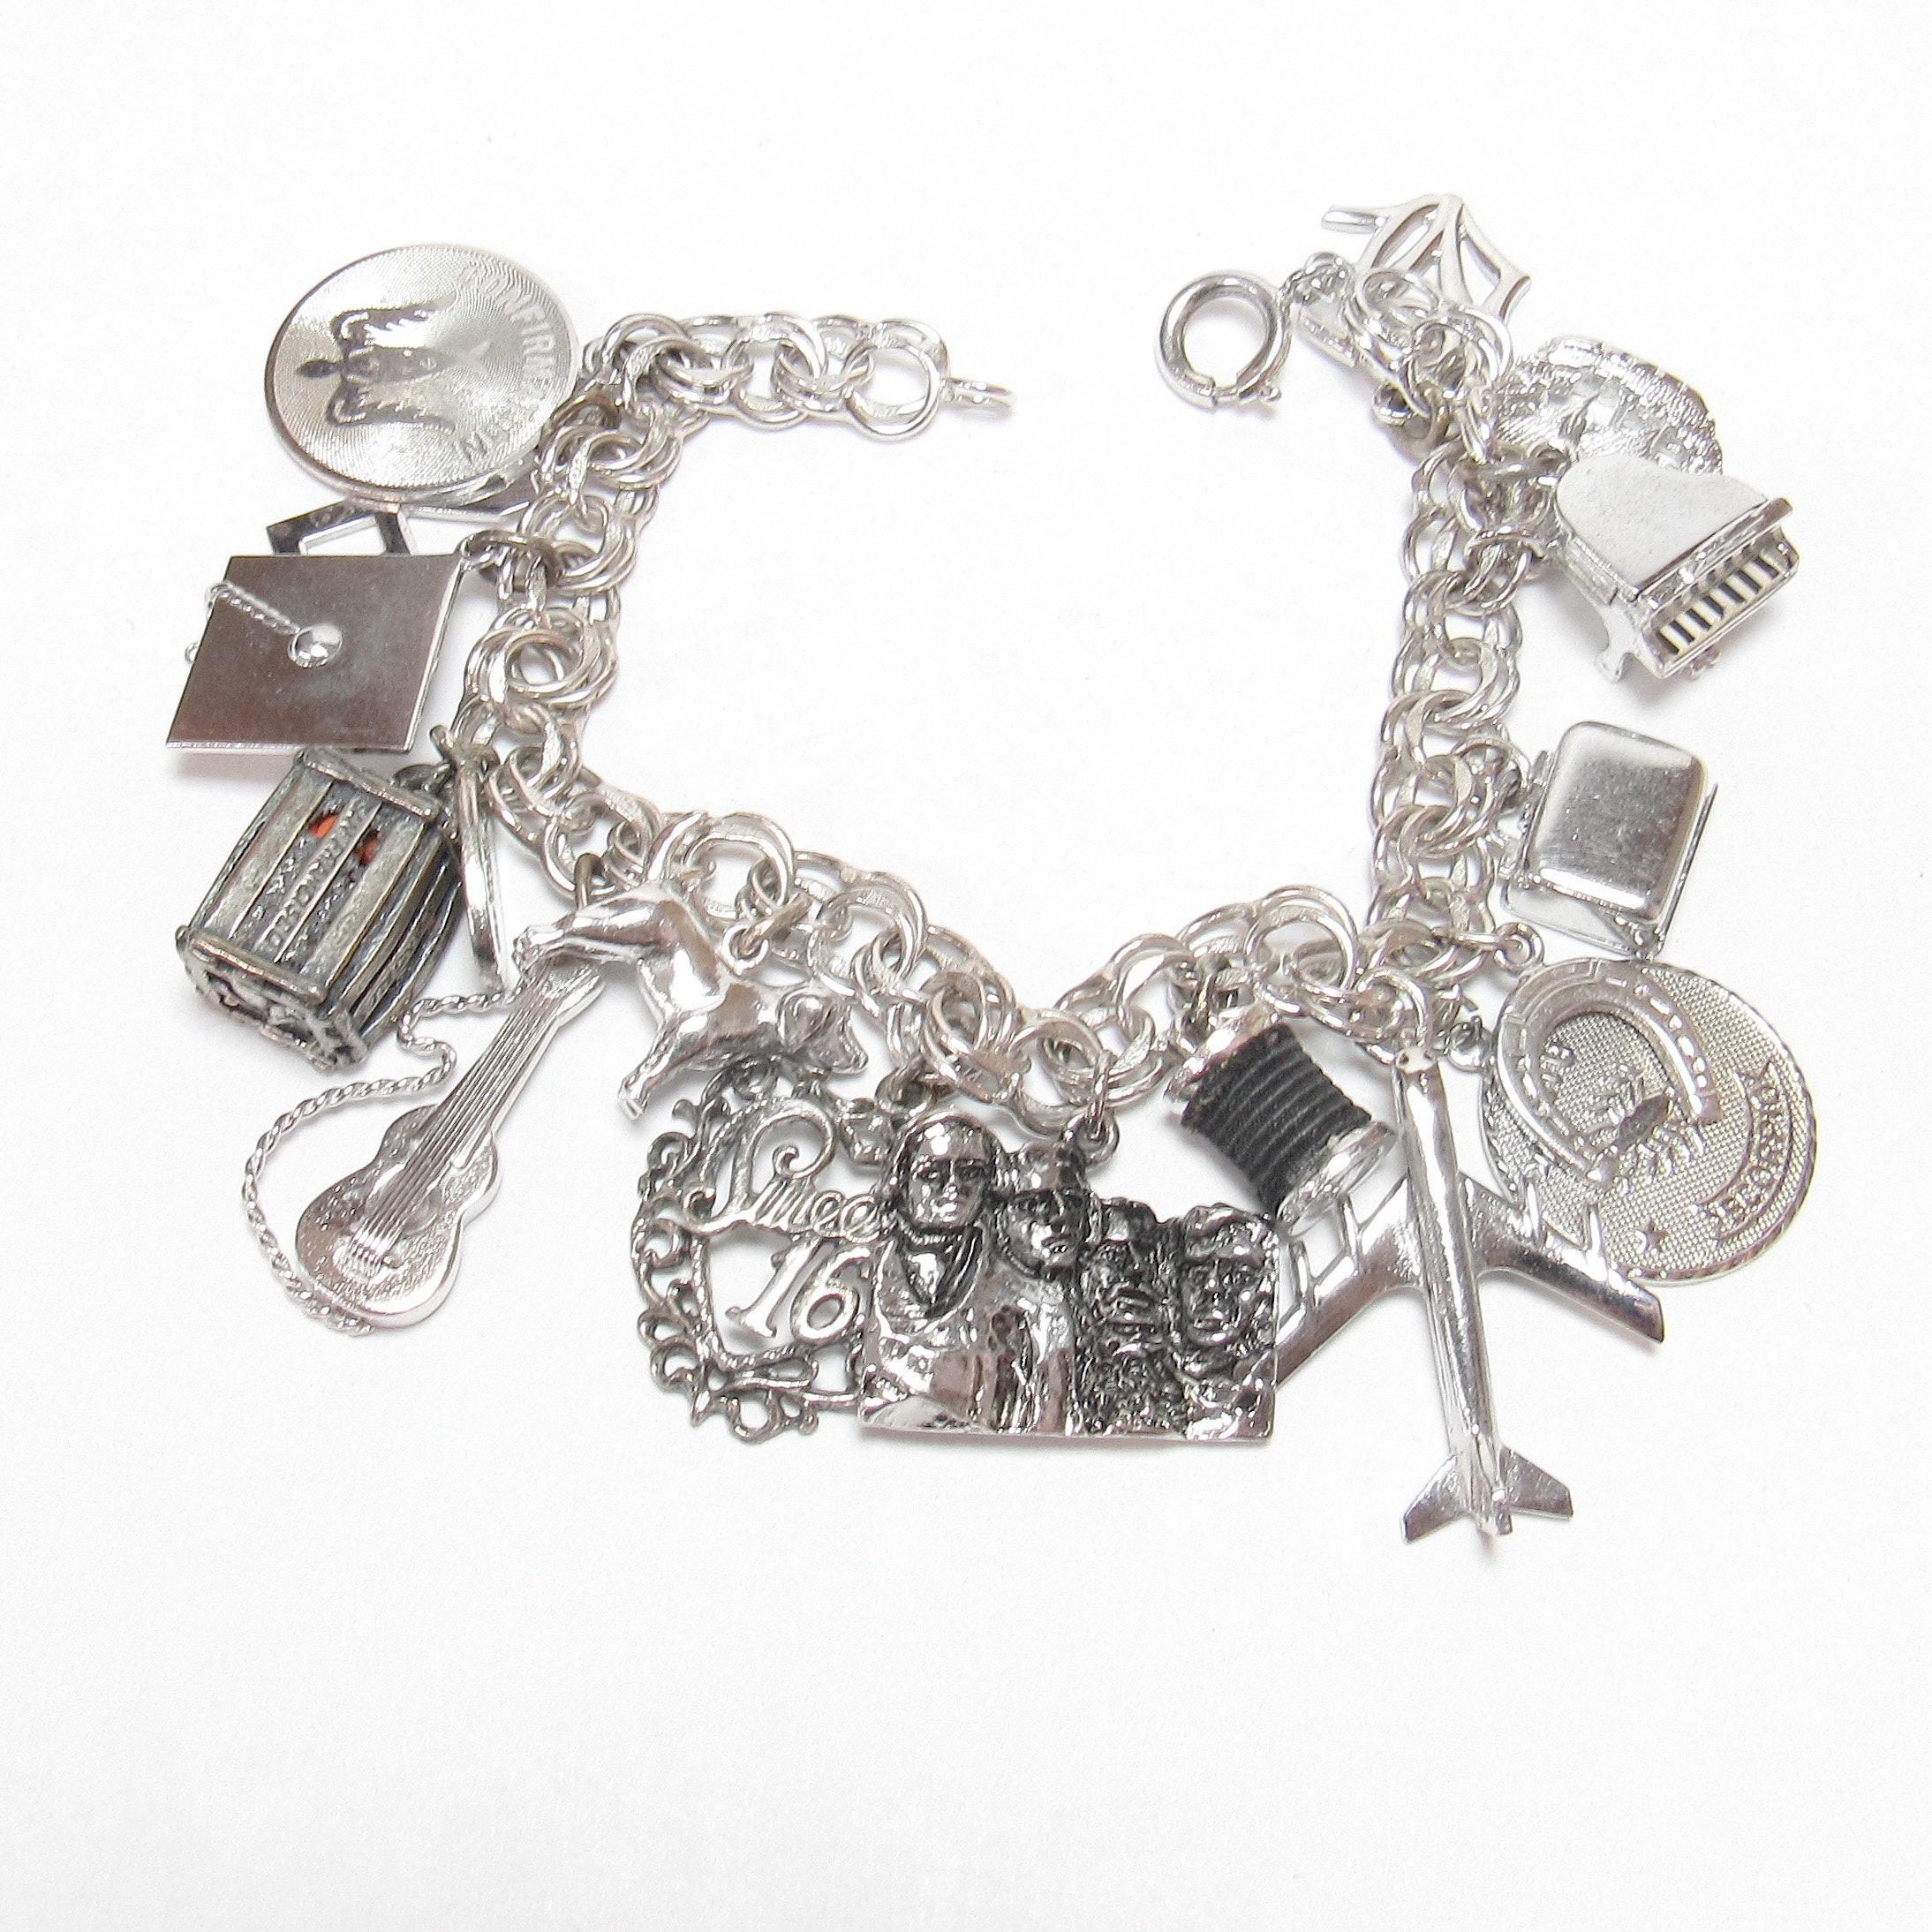 Charm Bangle Bracelet Making Starter Kit – Just Add ScriptCharms Charms! Silver / 5 Kits with 15 Glass Charms